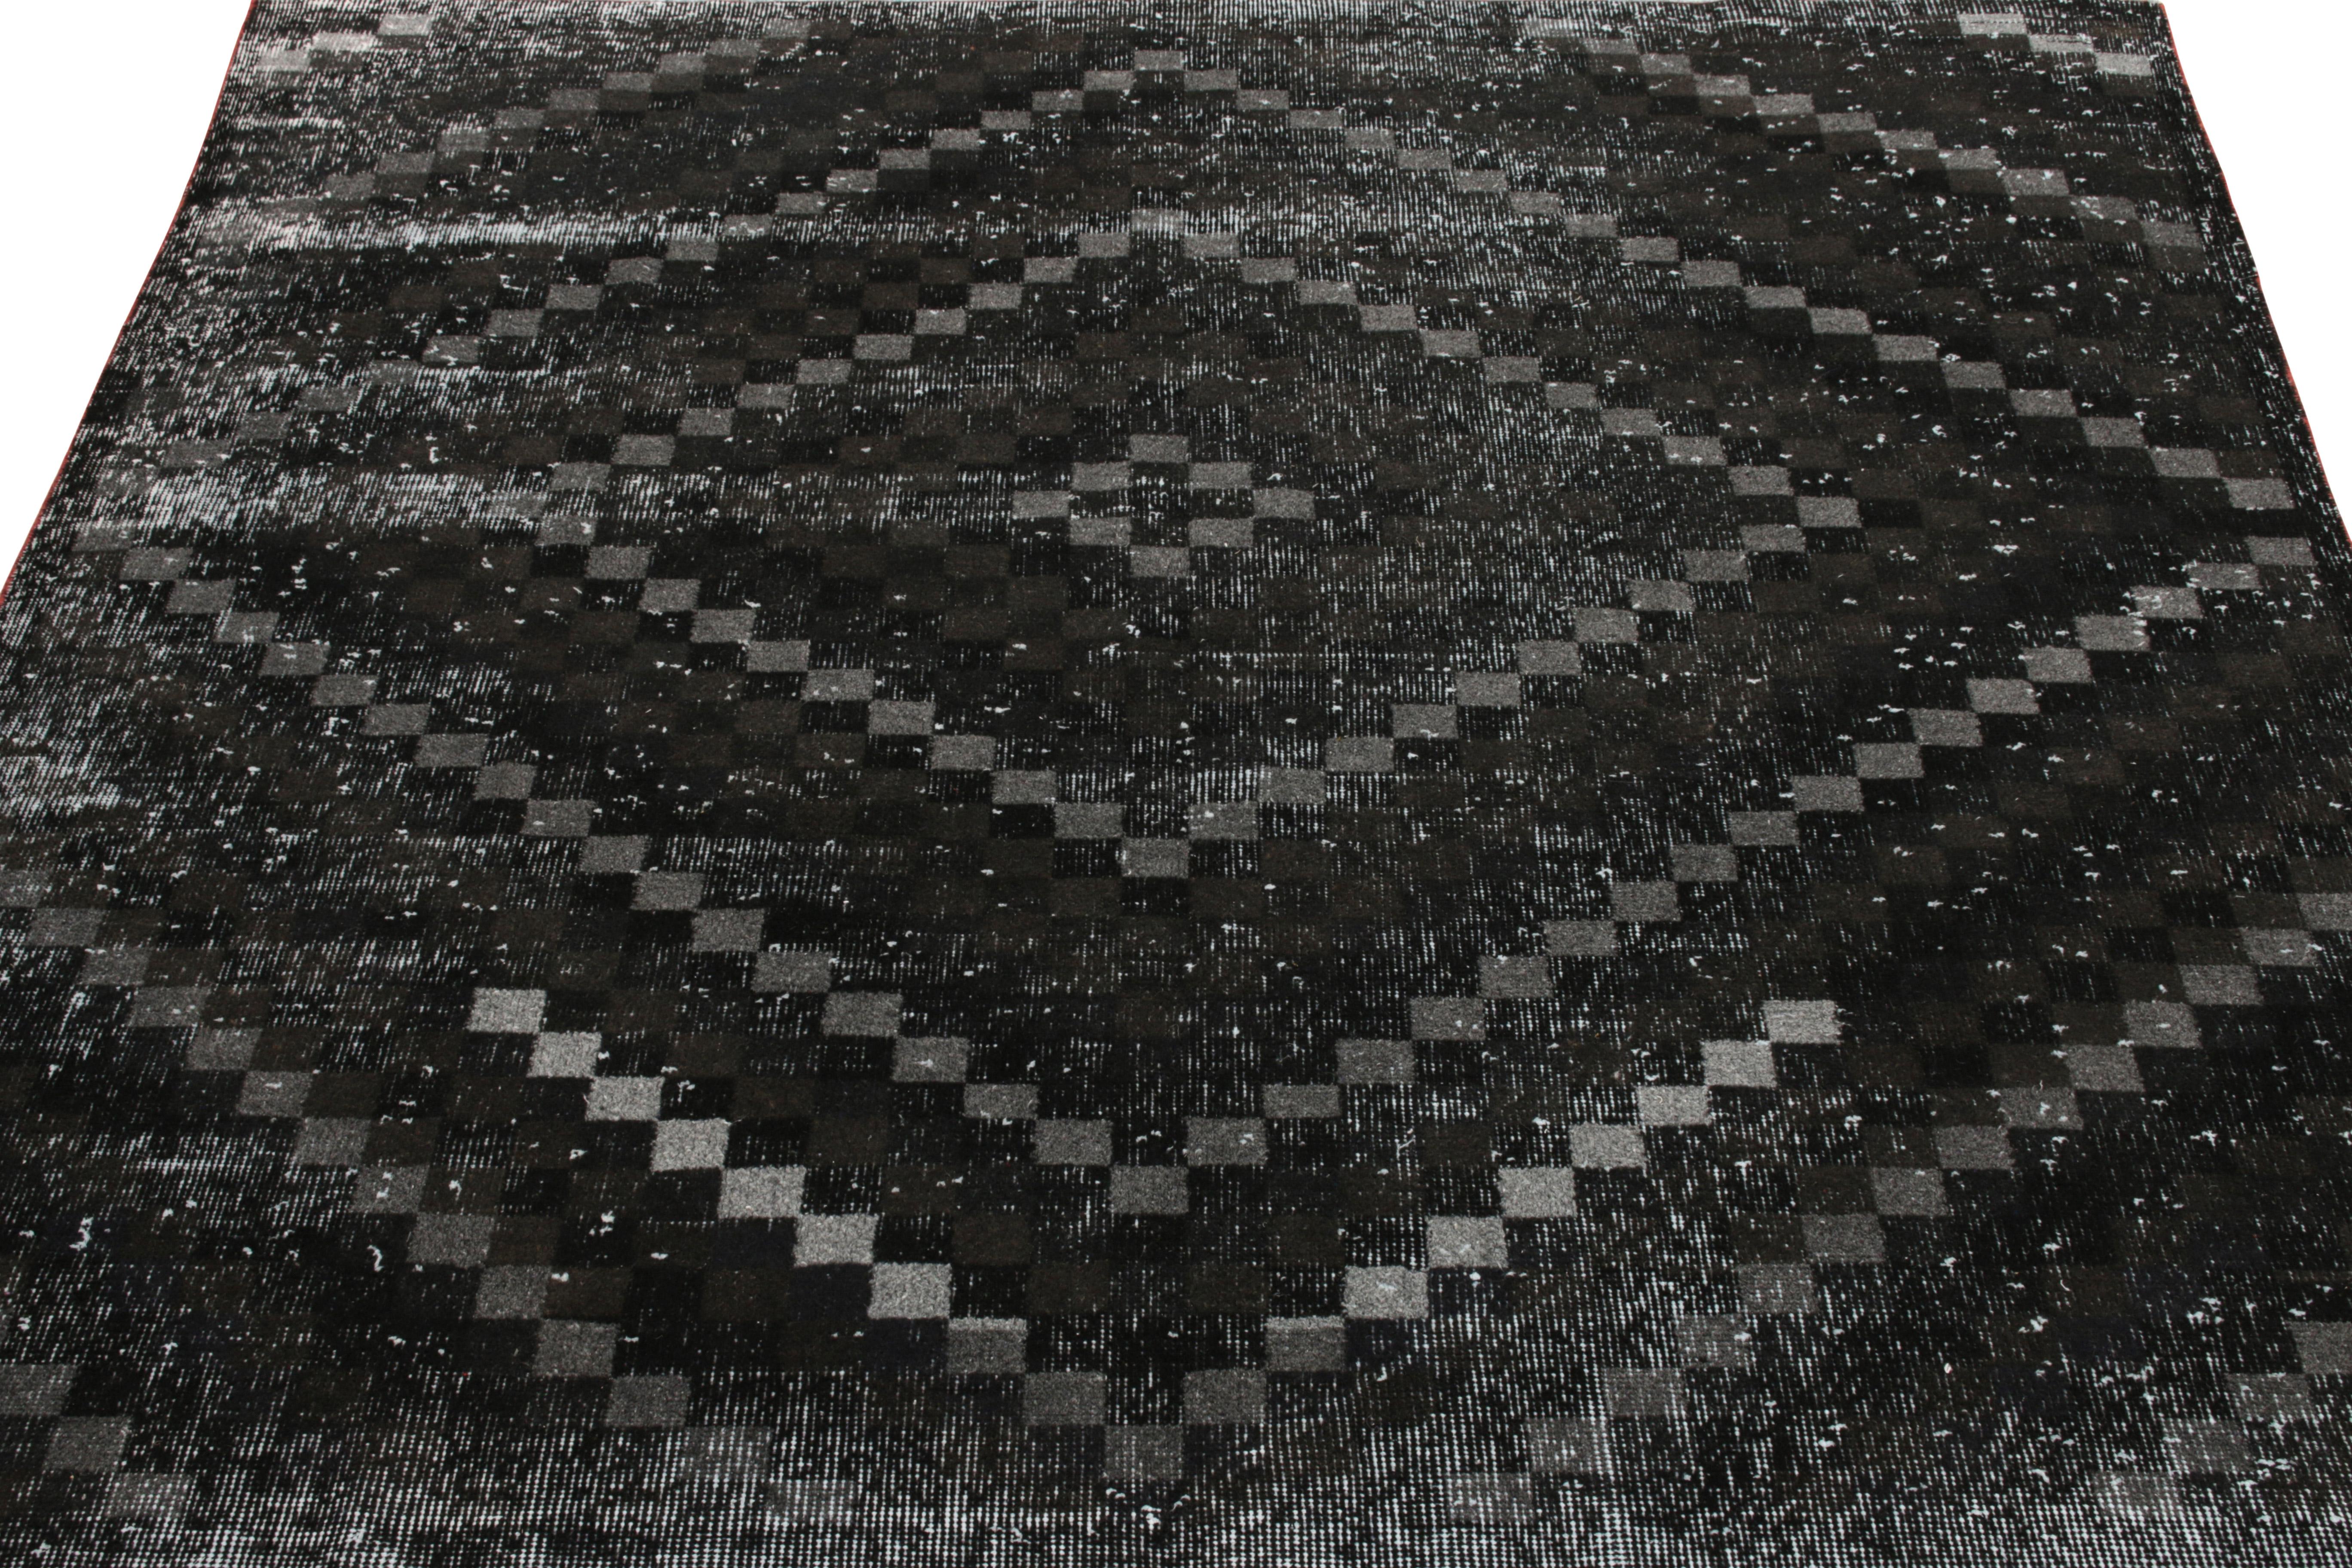 A square 6x6 vintage rug exemplifying Turkish Art Deco sensibilities, among the latest to join our Mid Century Pasha Collection. Coming from an acclaimed Turkish designer, this 1960s piece features a well defined diamond pattern in charcoal black &